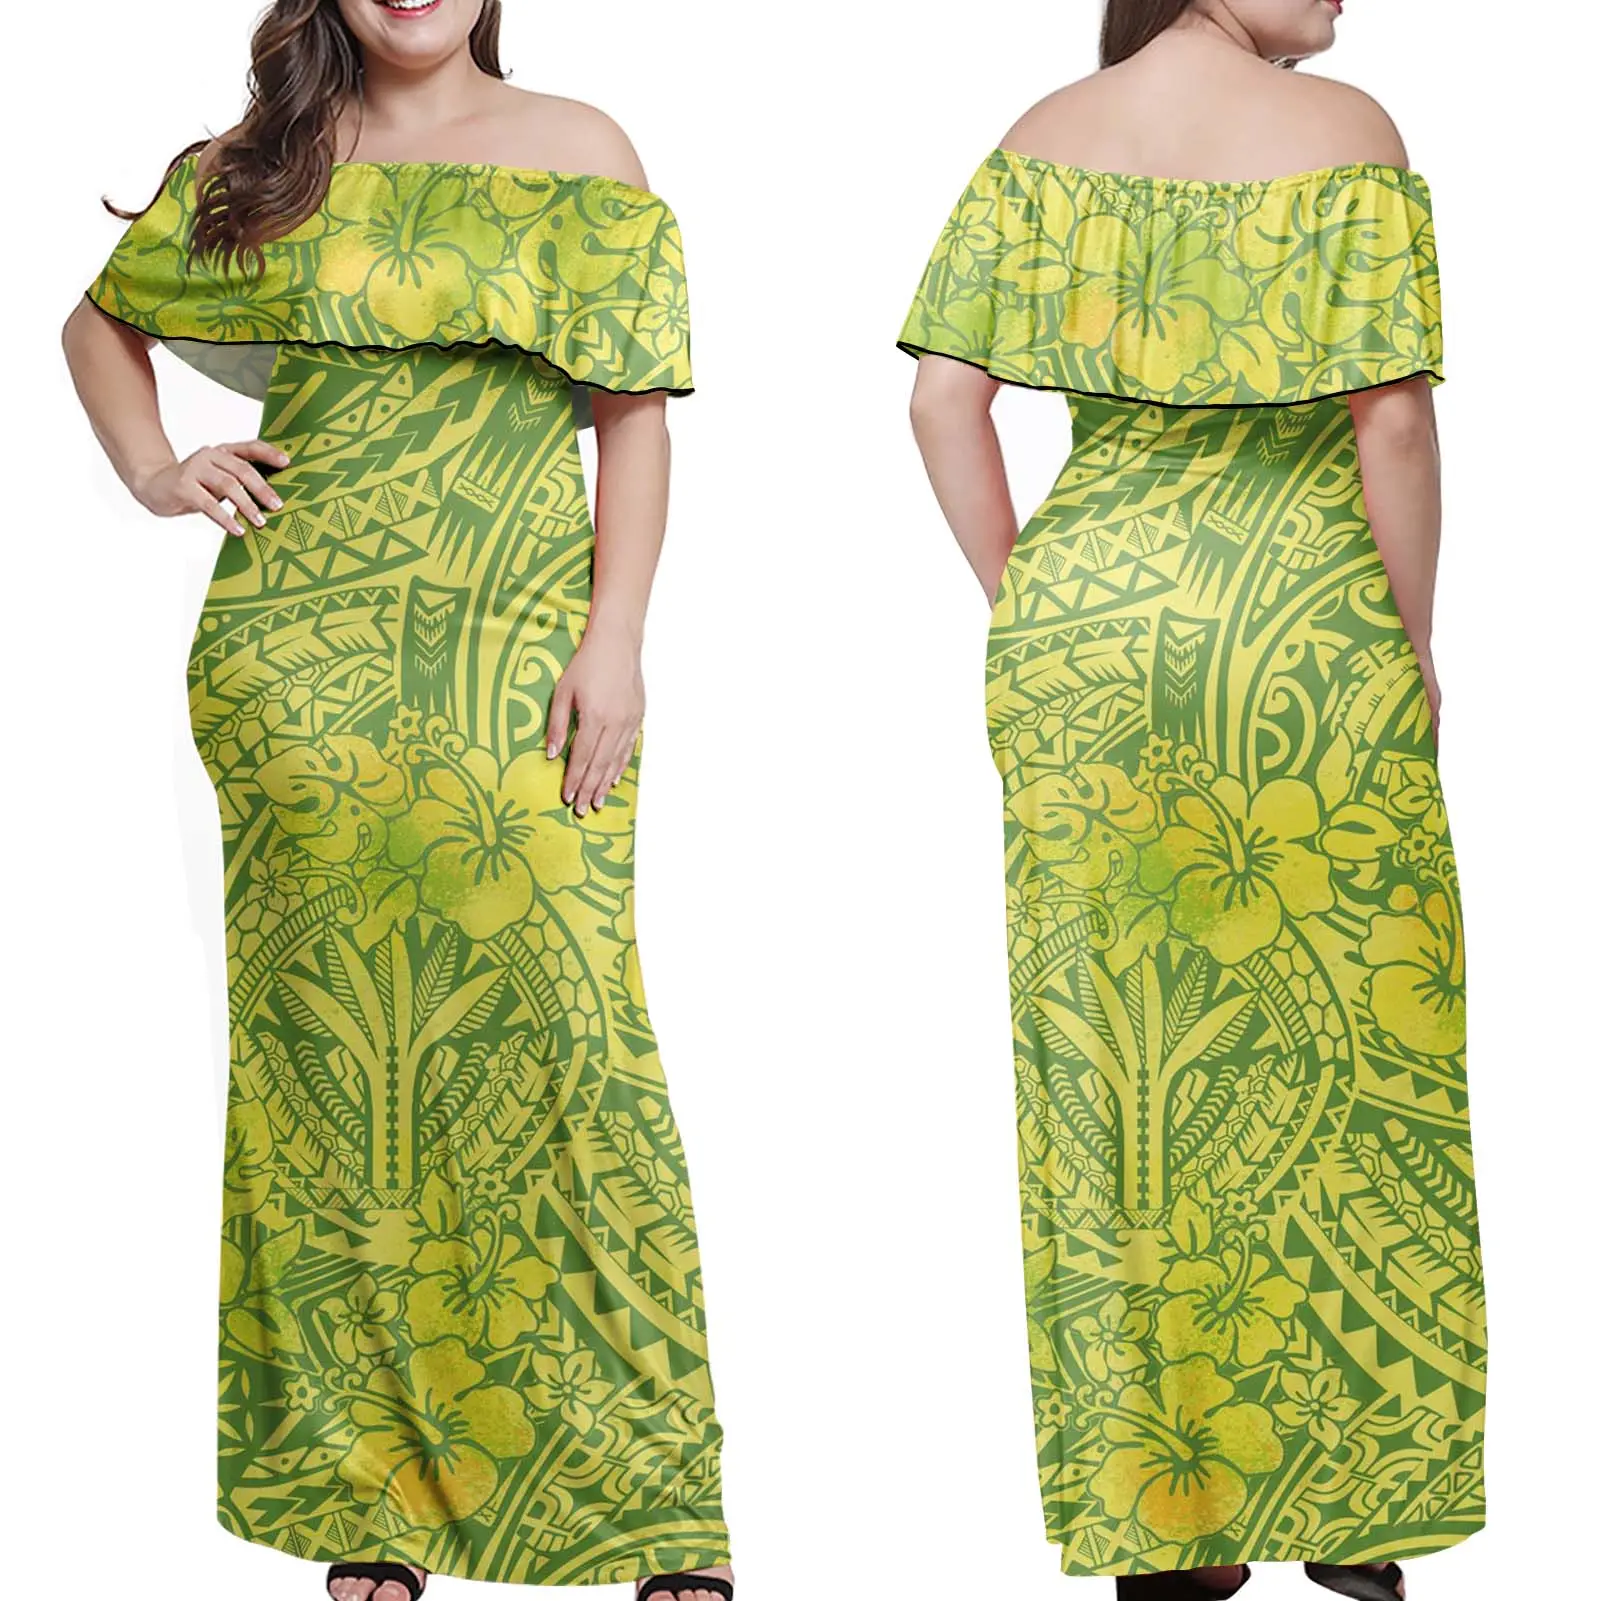 Up to 7XL Samoan Polynesian Tribal Printed Ladies Dresses Women Clothing Casual Chinese Dress Traditional Clothing Vendor Dress